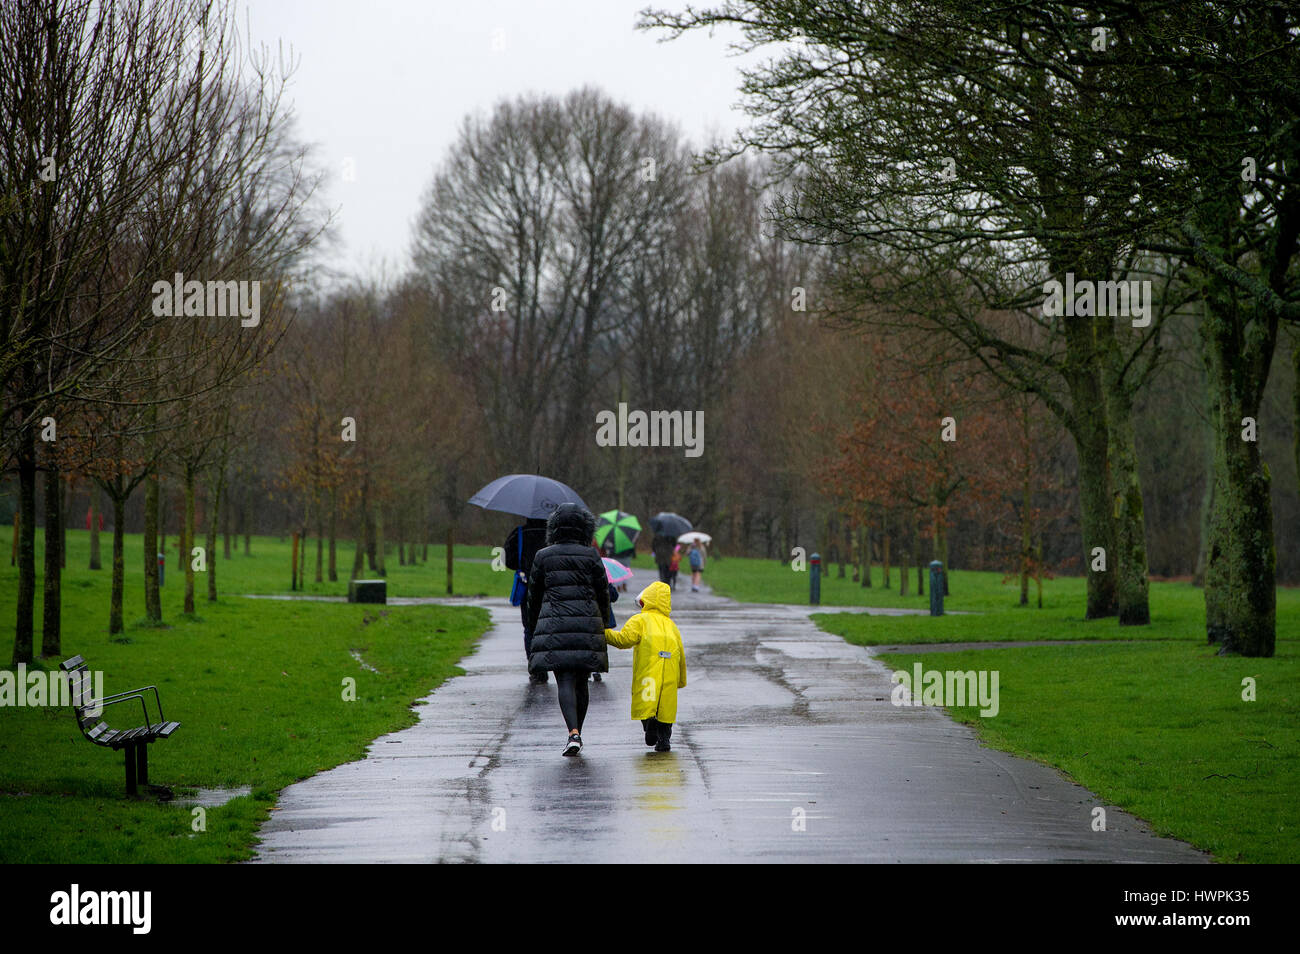 Bolton, UK. 22nd Mar, 2017. A wet walk to school through Leverhulme Park in Bolton, Lancashire, as torrential rain hampers the morning commute. Picture by Paul Heyes, Wednesday March 22, 2017. Credit: Paul Heyes/Alamy Live News Stock Photo